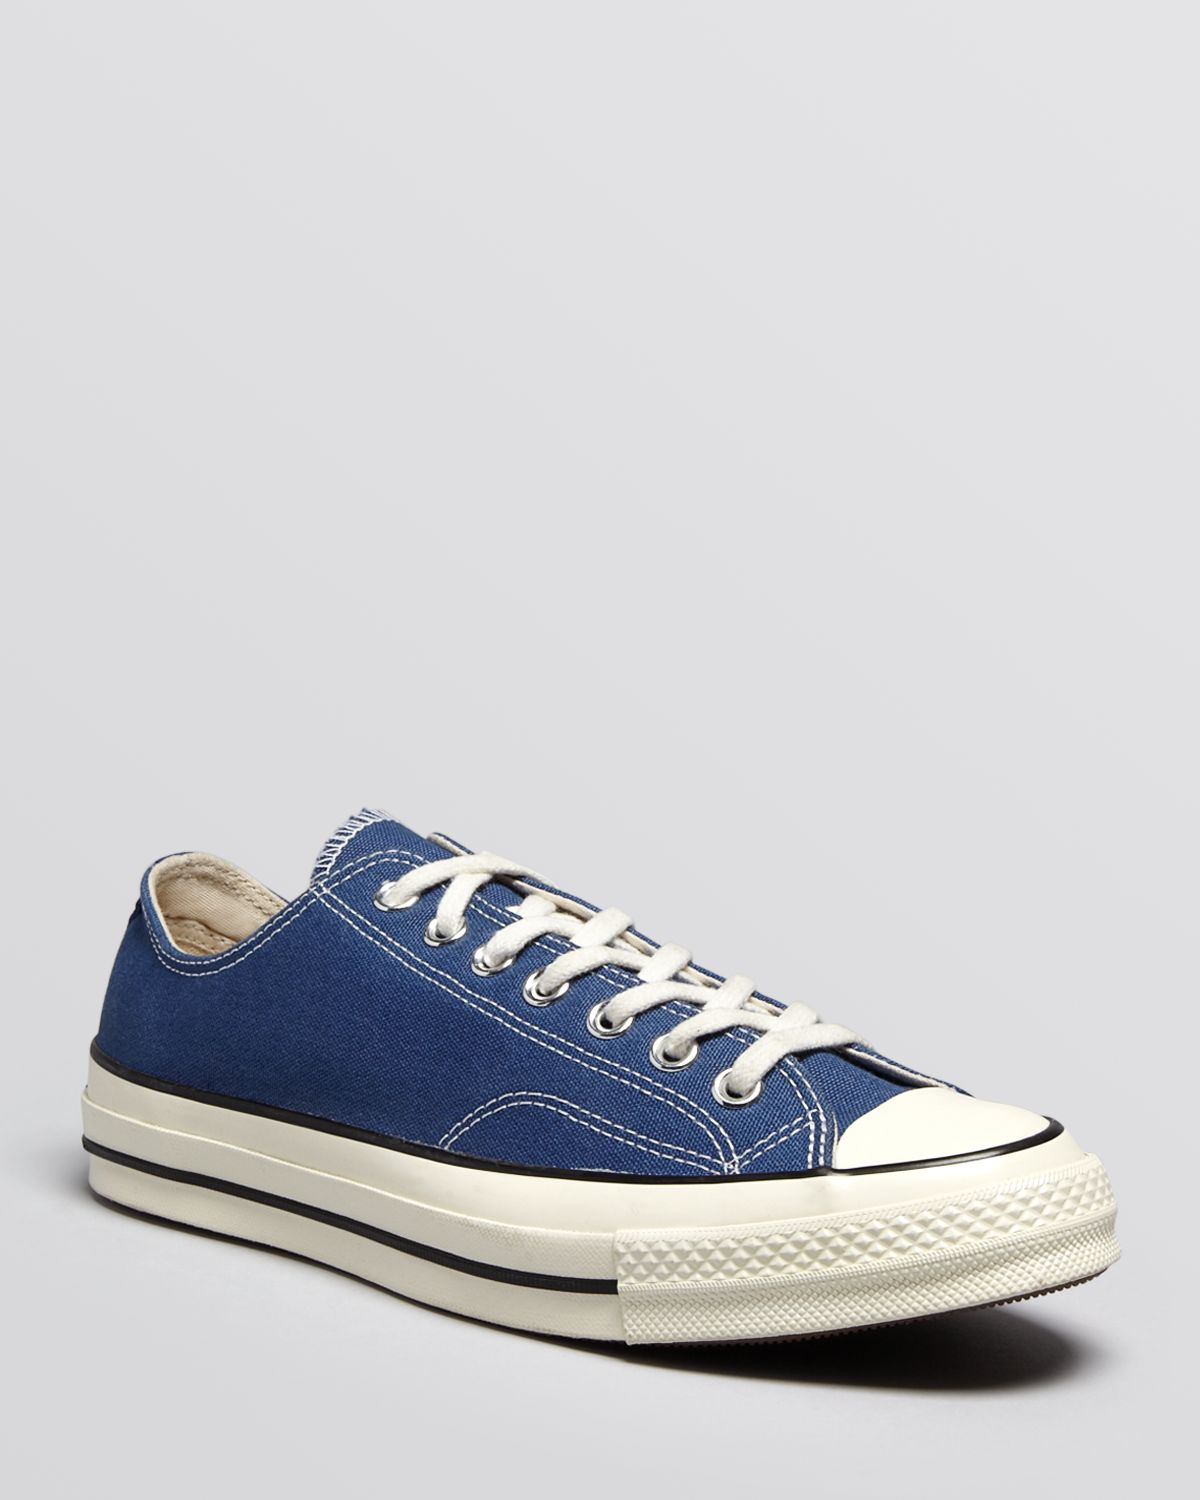 Lyst - Converse Chuck Taylor All Star '70 Low Top Sneakers in Blue for Men